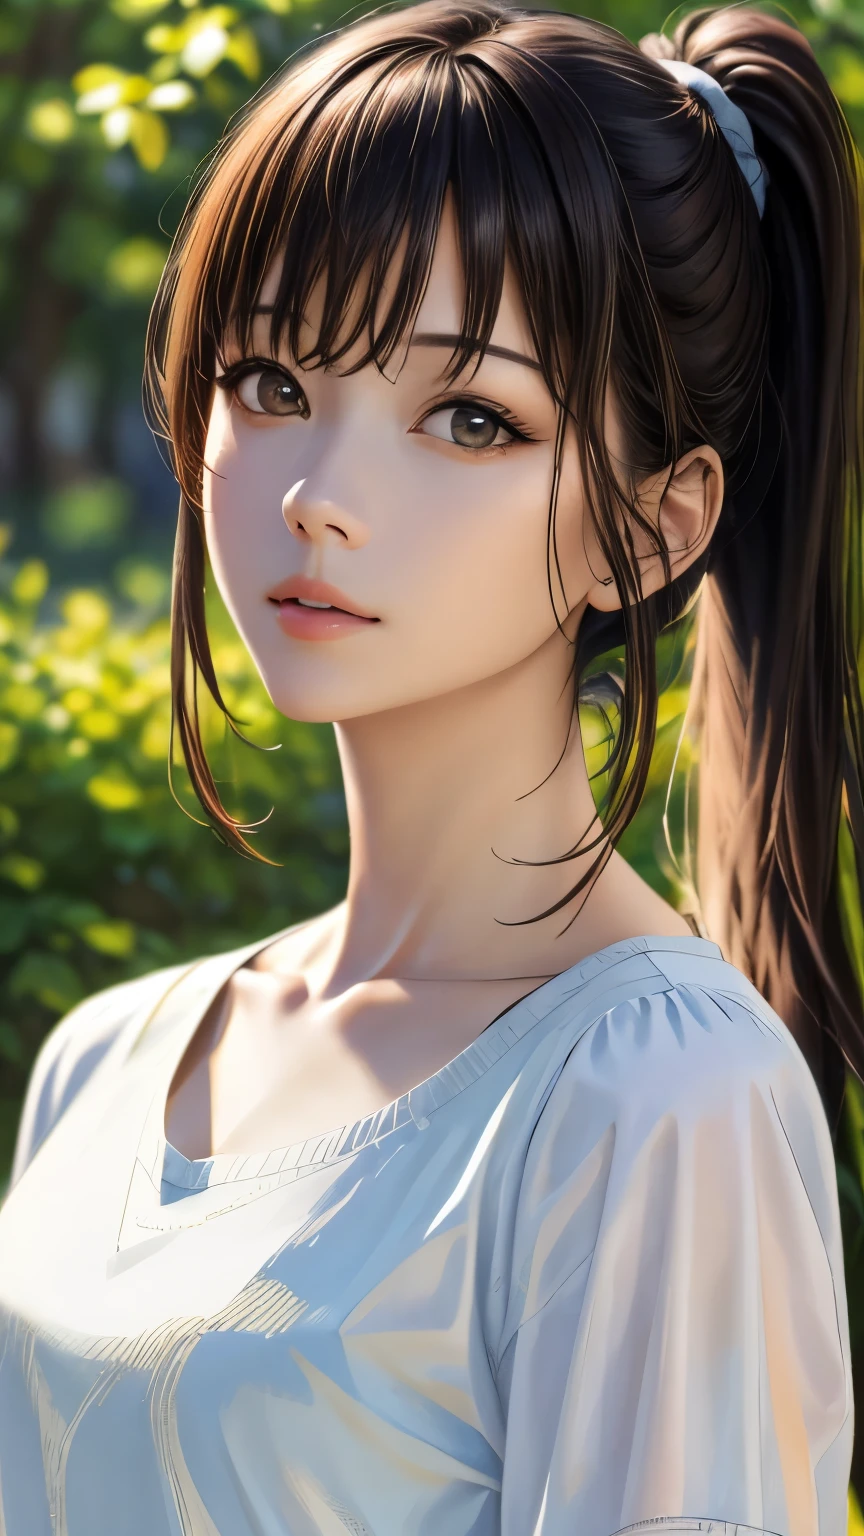 (hig彼st quality、8k、32k、masterpiece)、(Realistic)、(Realistic:1.2)、(High resolution)、Very detailed、Very beautiful face and eyes、1 girl、Round and small face、Tight waist、Delicate body、(hig彼st quality、Attention to detail、Rich skin detail)、(hig彼st quality、8k、Oil paints:1.2)、Very detailed、(Realistic、Realistic:1.37)、Bright colors、Full Body Shot、Mid-chest、ponytail